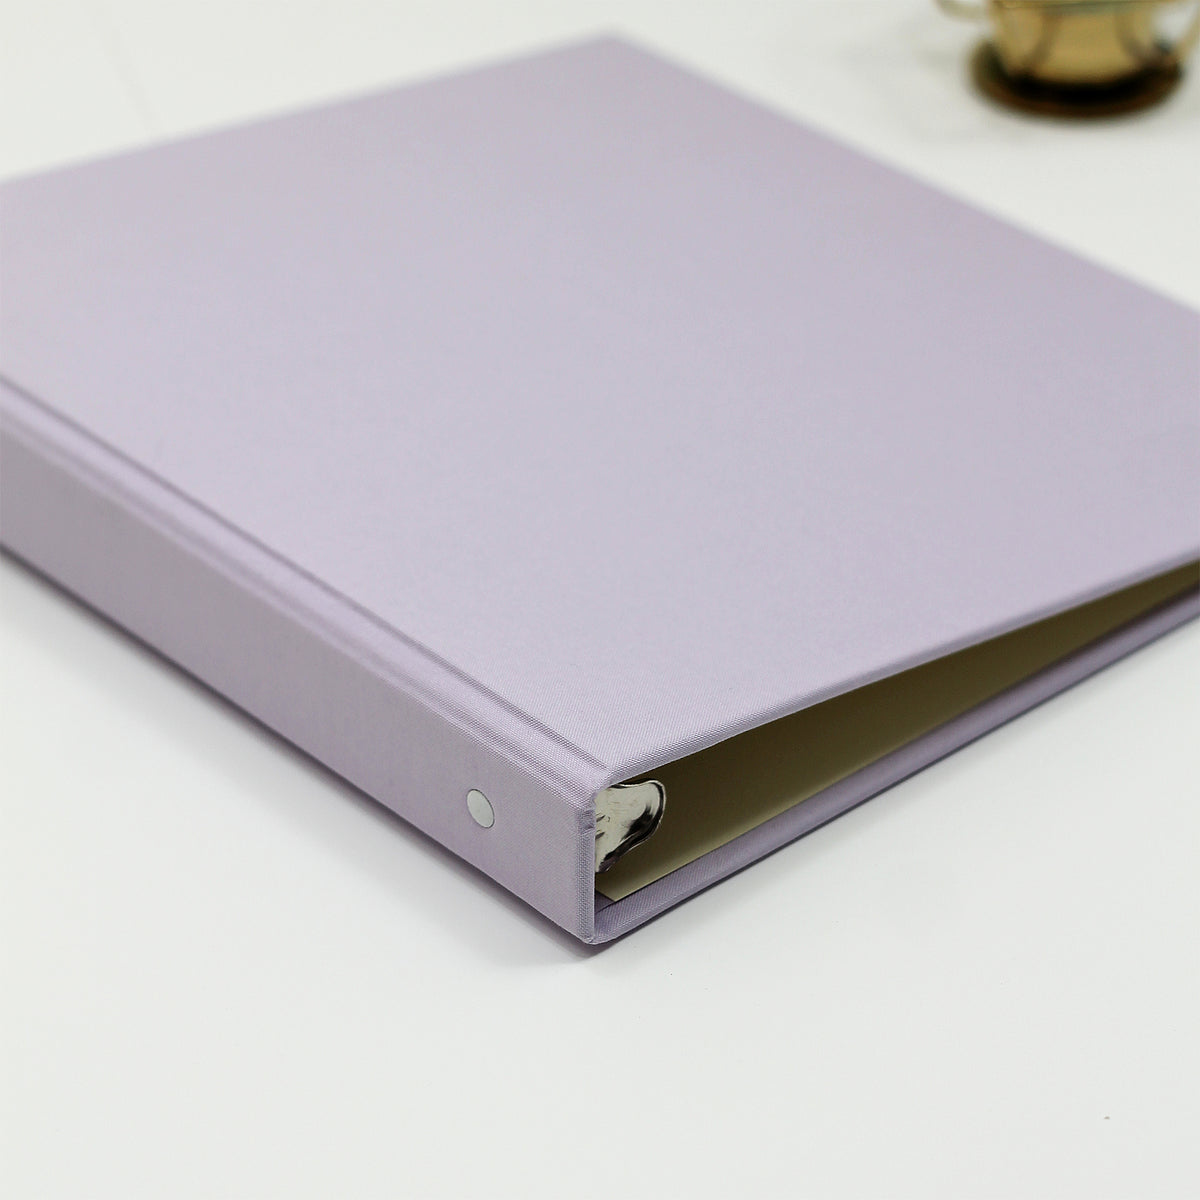 Holiday Card Album | Cover: Lavender Cotton | Embossed with “Holiday Cards” | Available Personalized